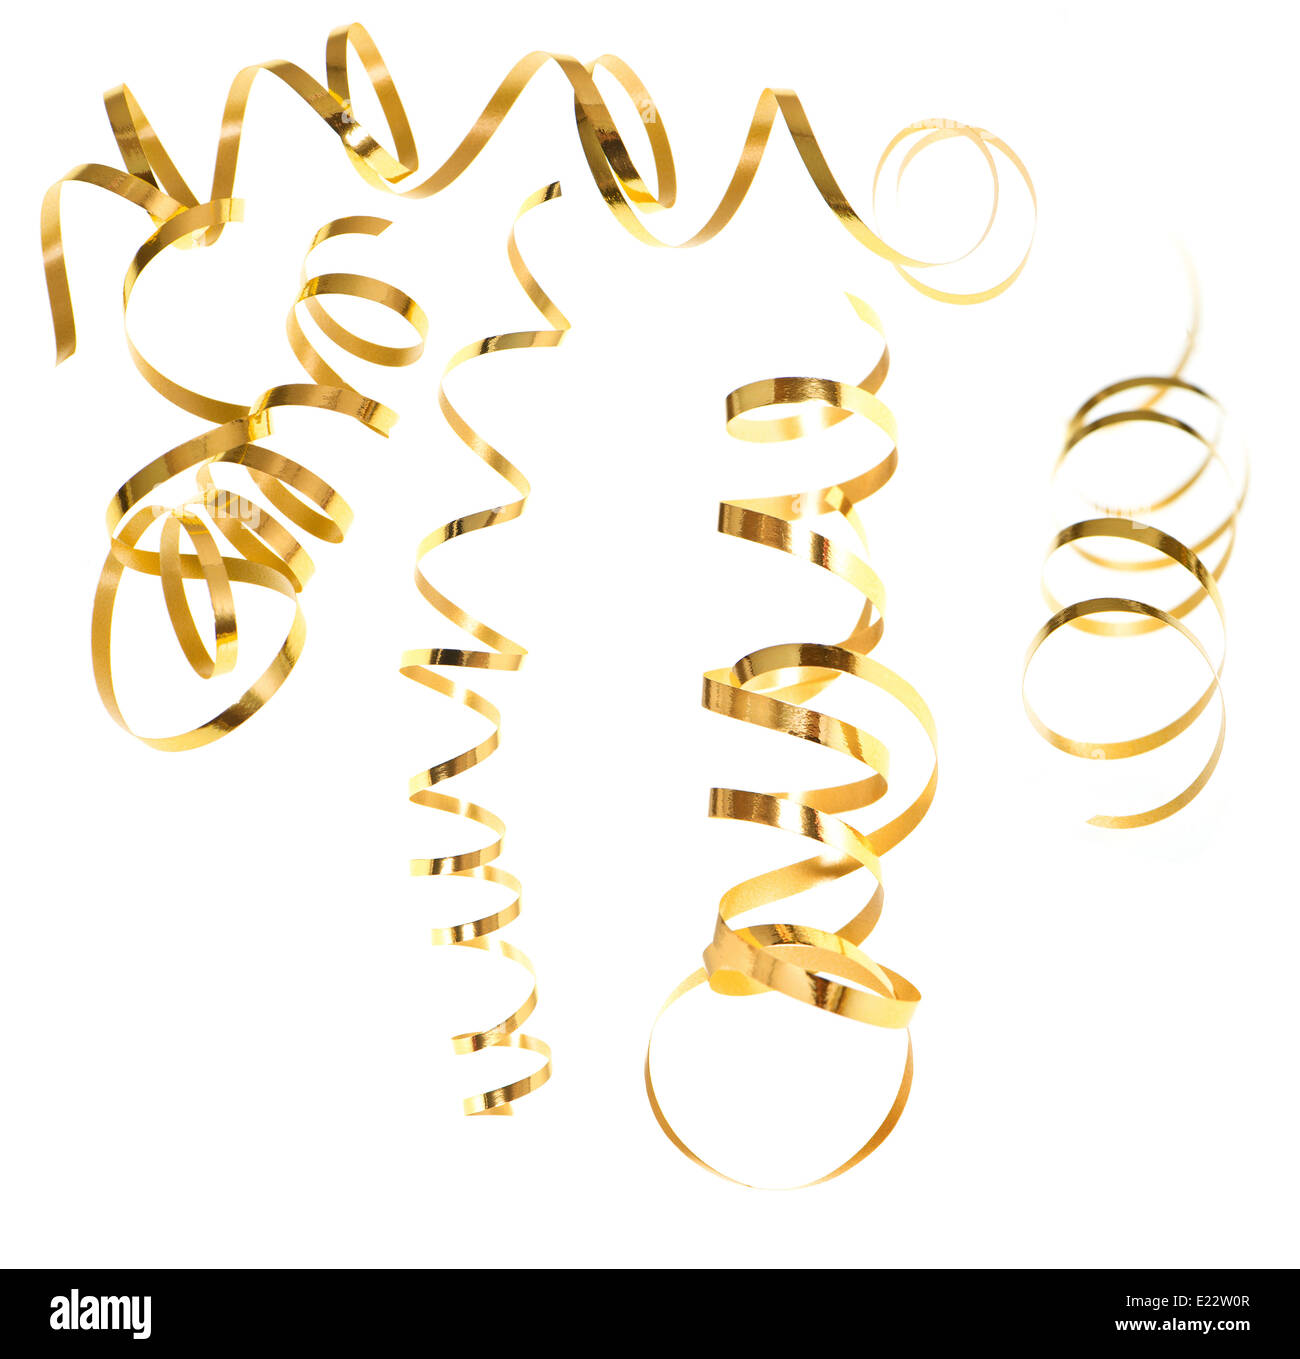 Golden Serpentine Set Gold Streamers Isolated Stock Vector (Royalty Free)  1046358202